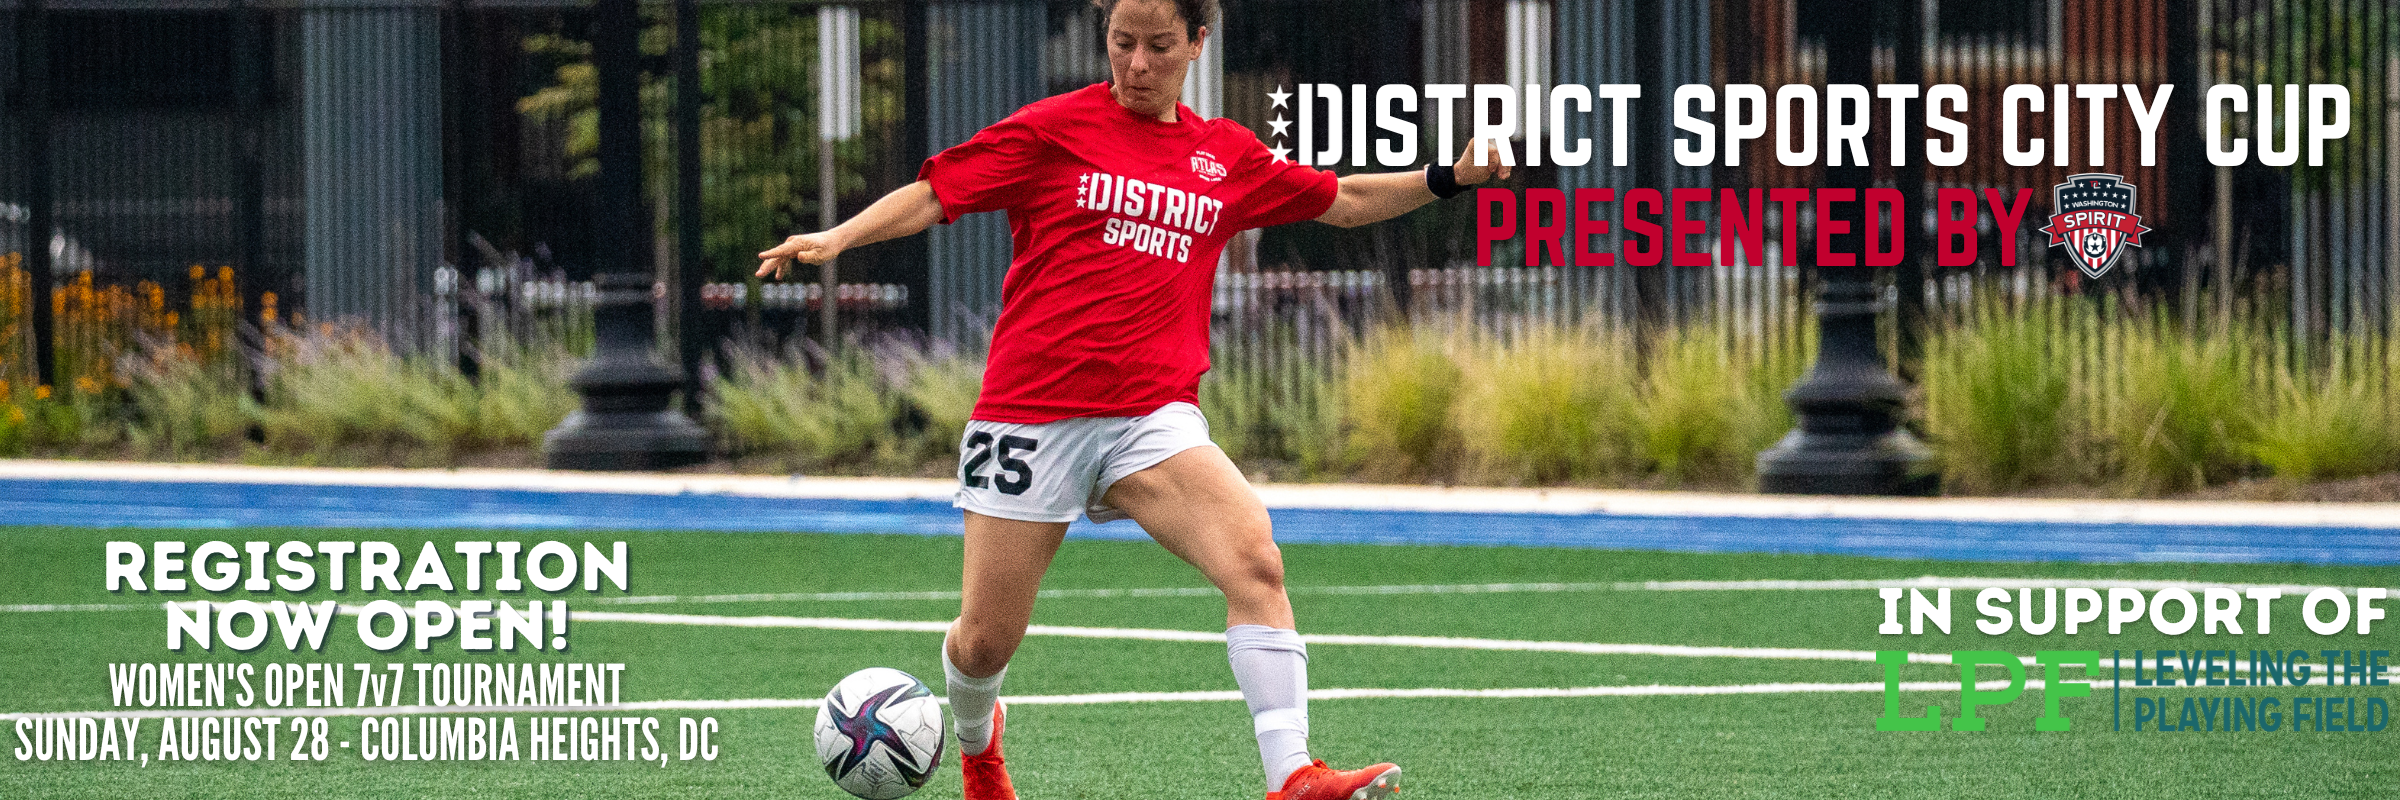 District Sports City Cup presented by the Washington Spirit